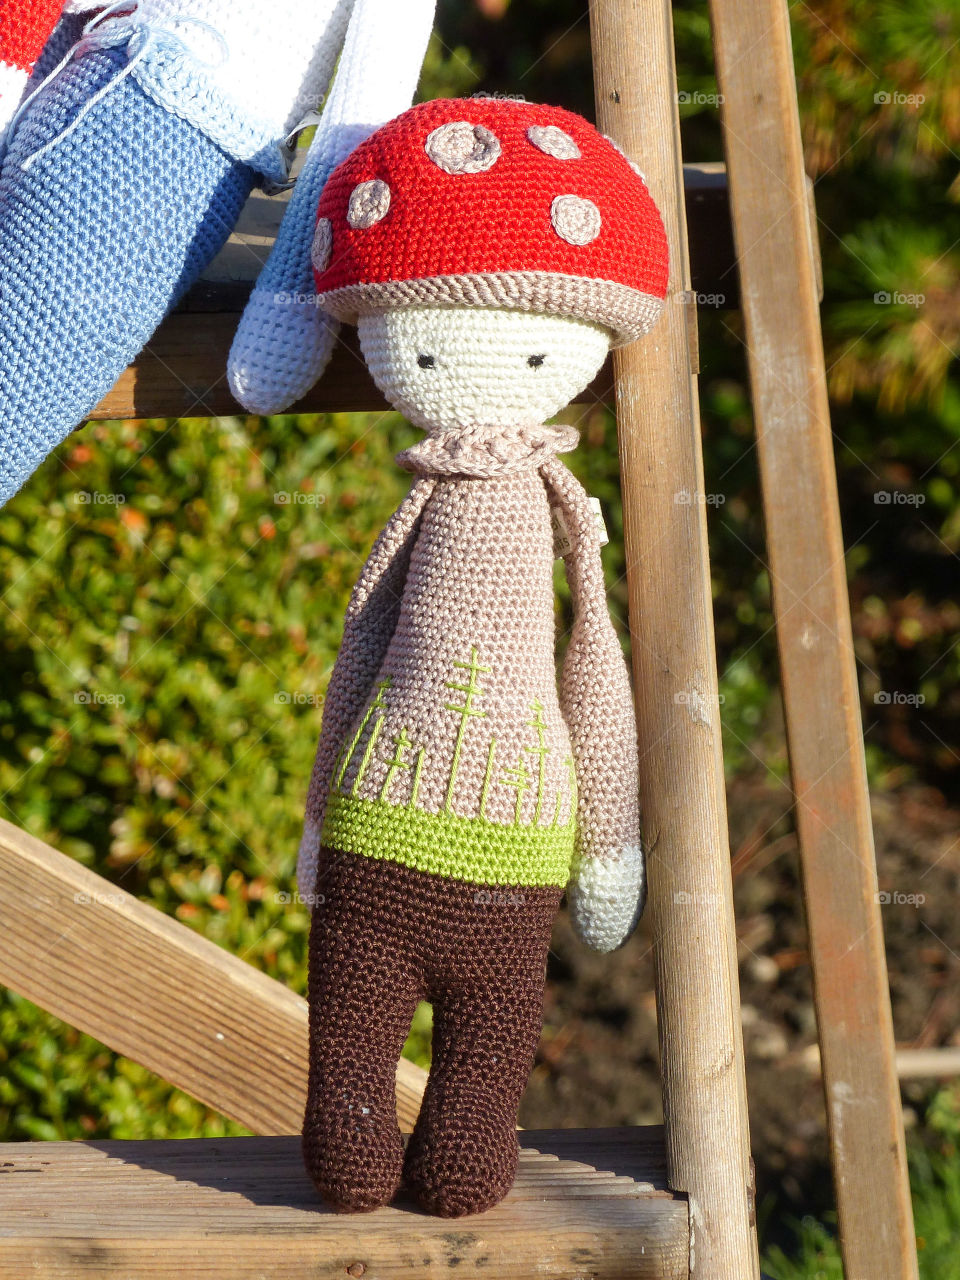 Crochet toadstool doll. A handmade crochet toadstool doll displayed on a vintage wooden stepladder